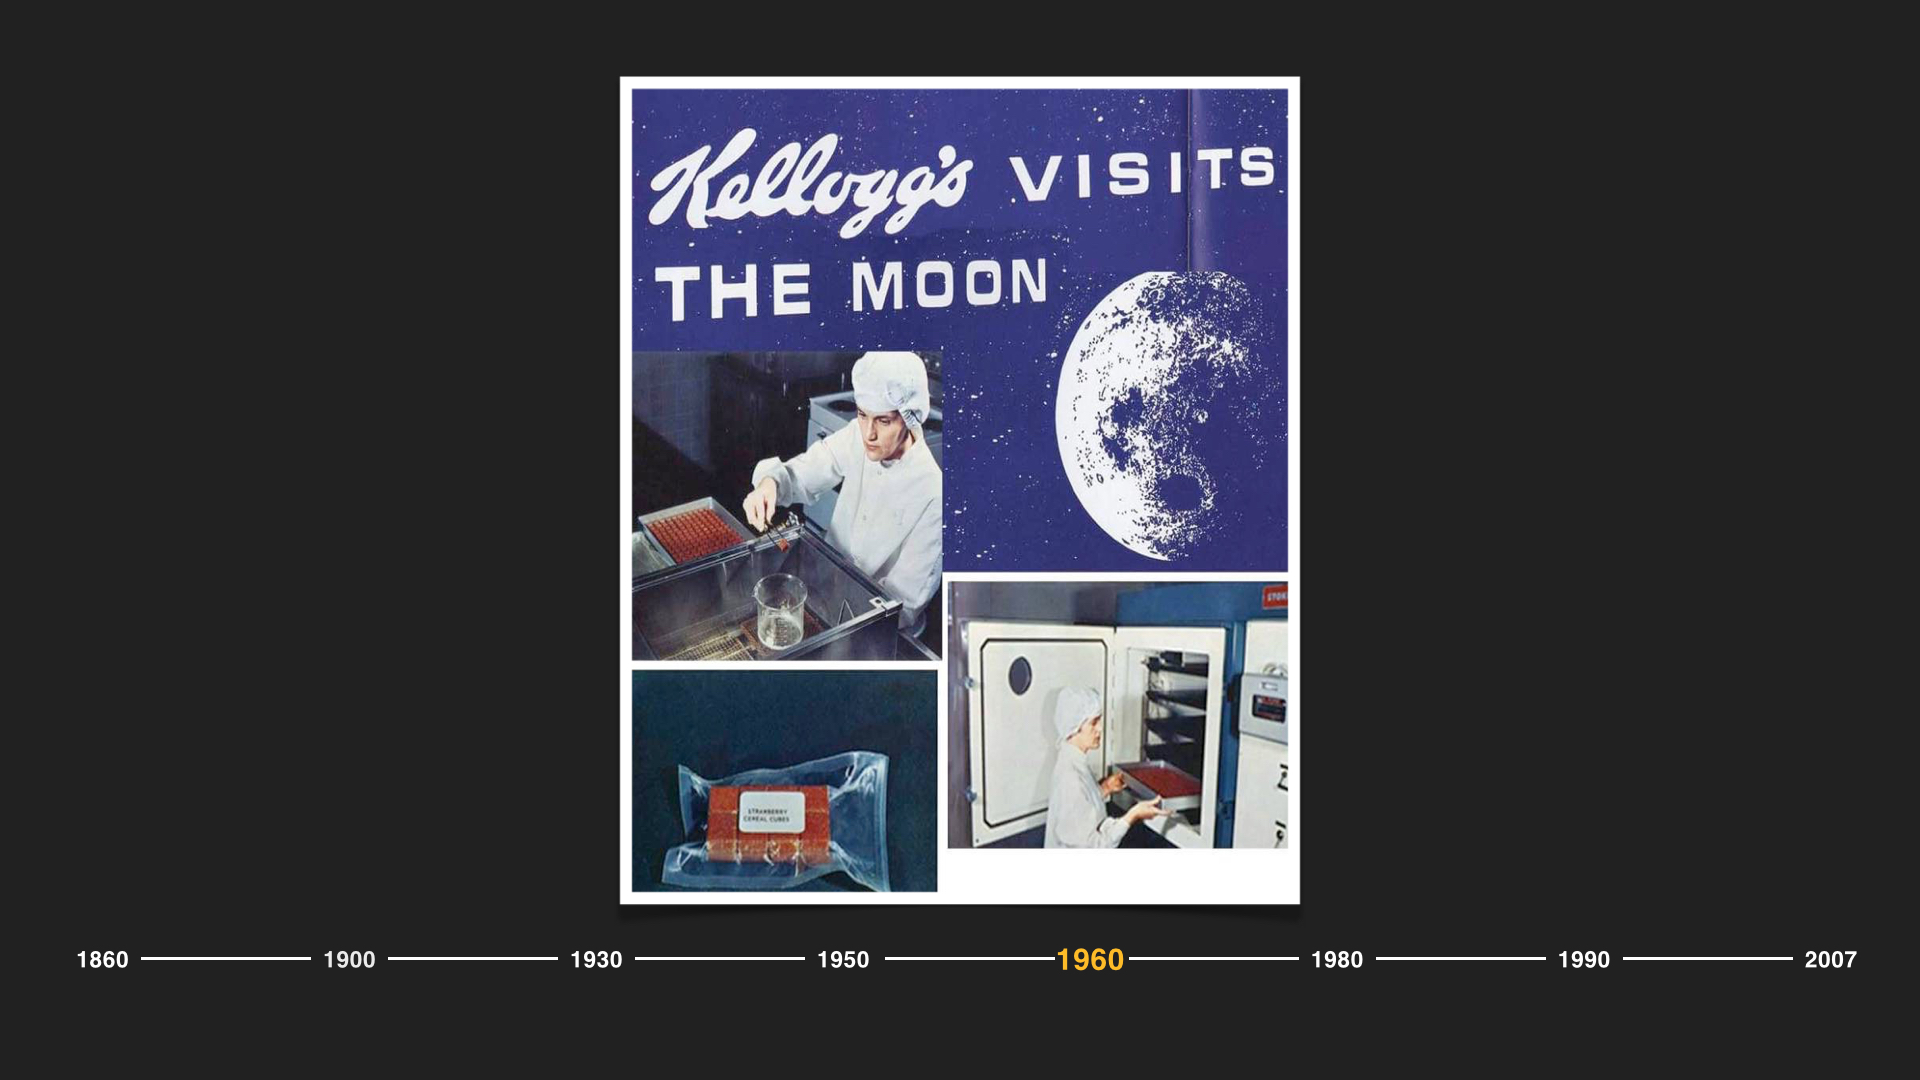  And as trust and pride in Big Food prevailed, our brands even landed on the moon.  In 1969, when Apollo 11 blasted off, to help ensure the astronauts had a delicious breakfast in space, Kellogg’s was there as the breakfast of choice. 